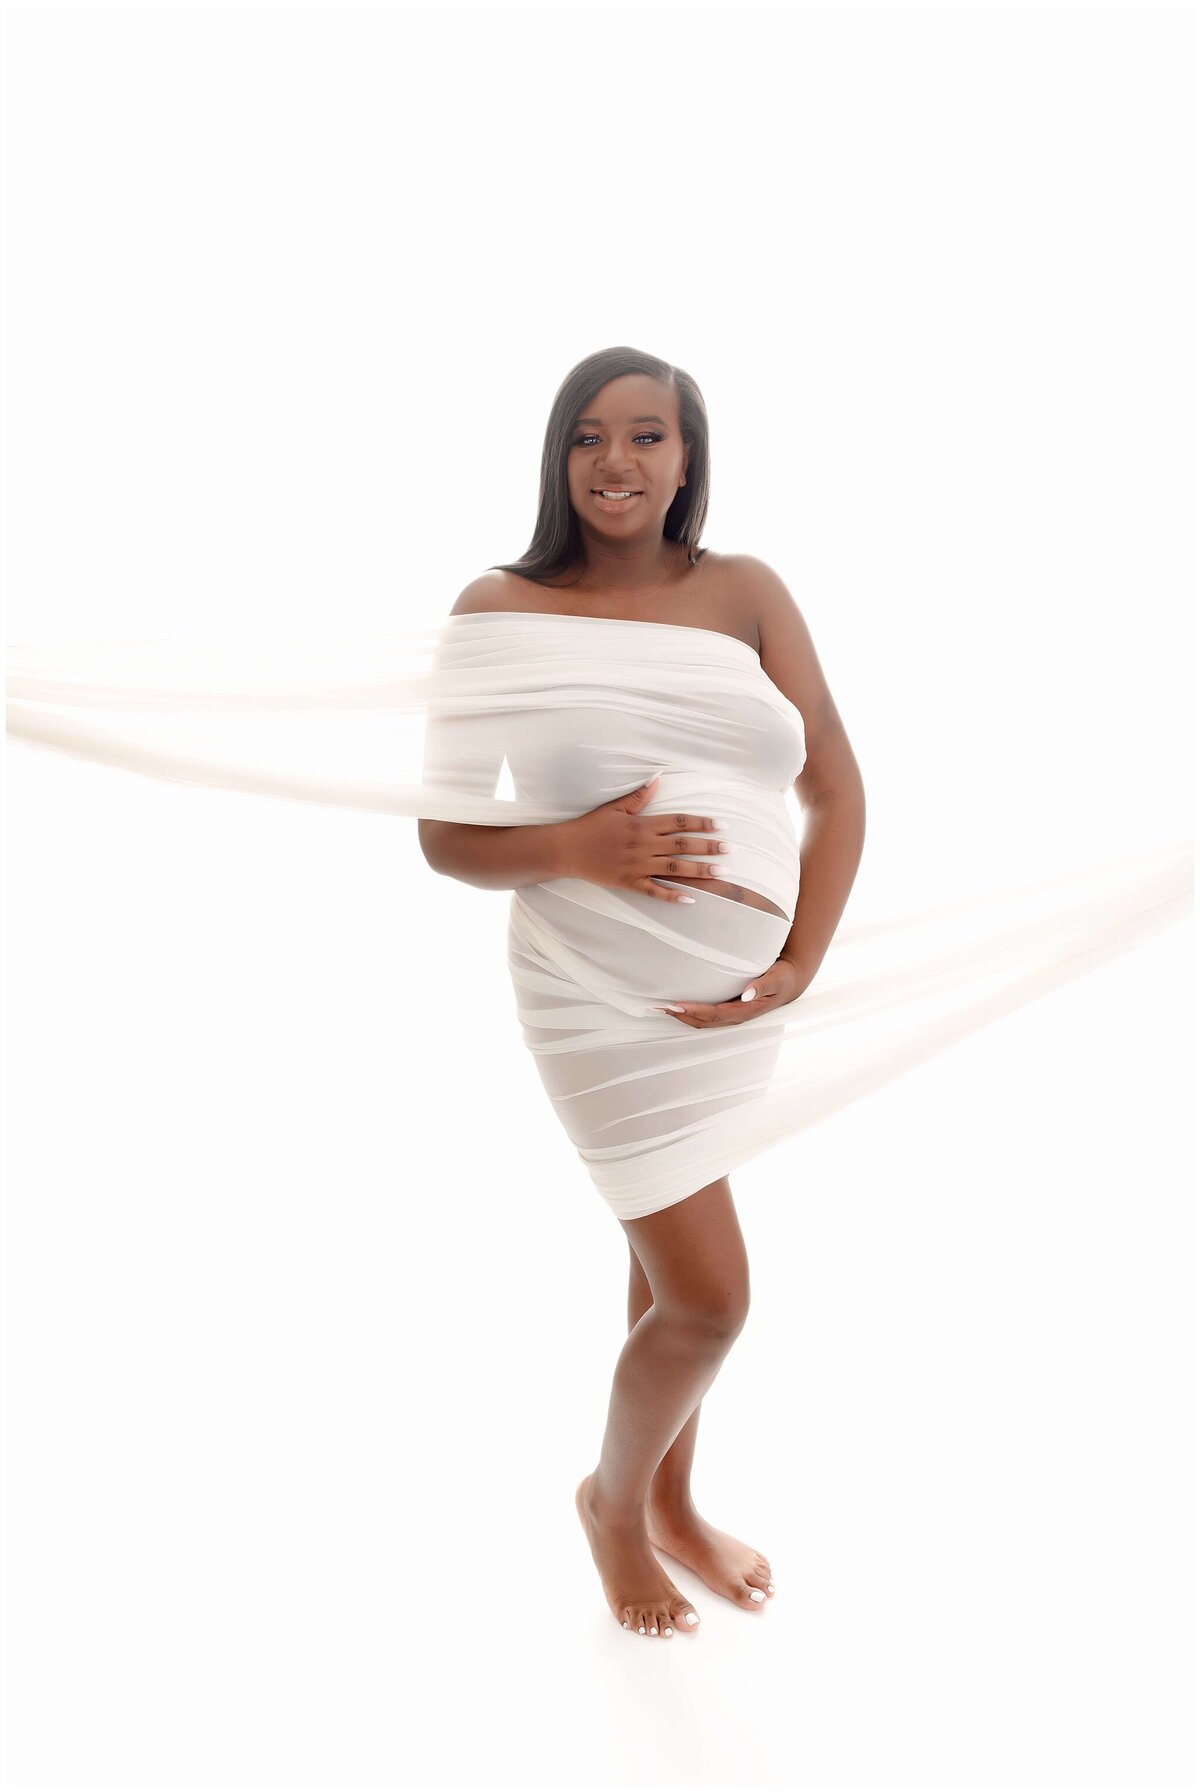 Pregnant woman wrapped in white fabric, standing on white background. She cradles her baby bump with a serene smile on her face, radiating joy and anticipation.